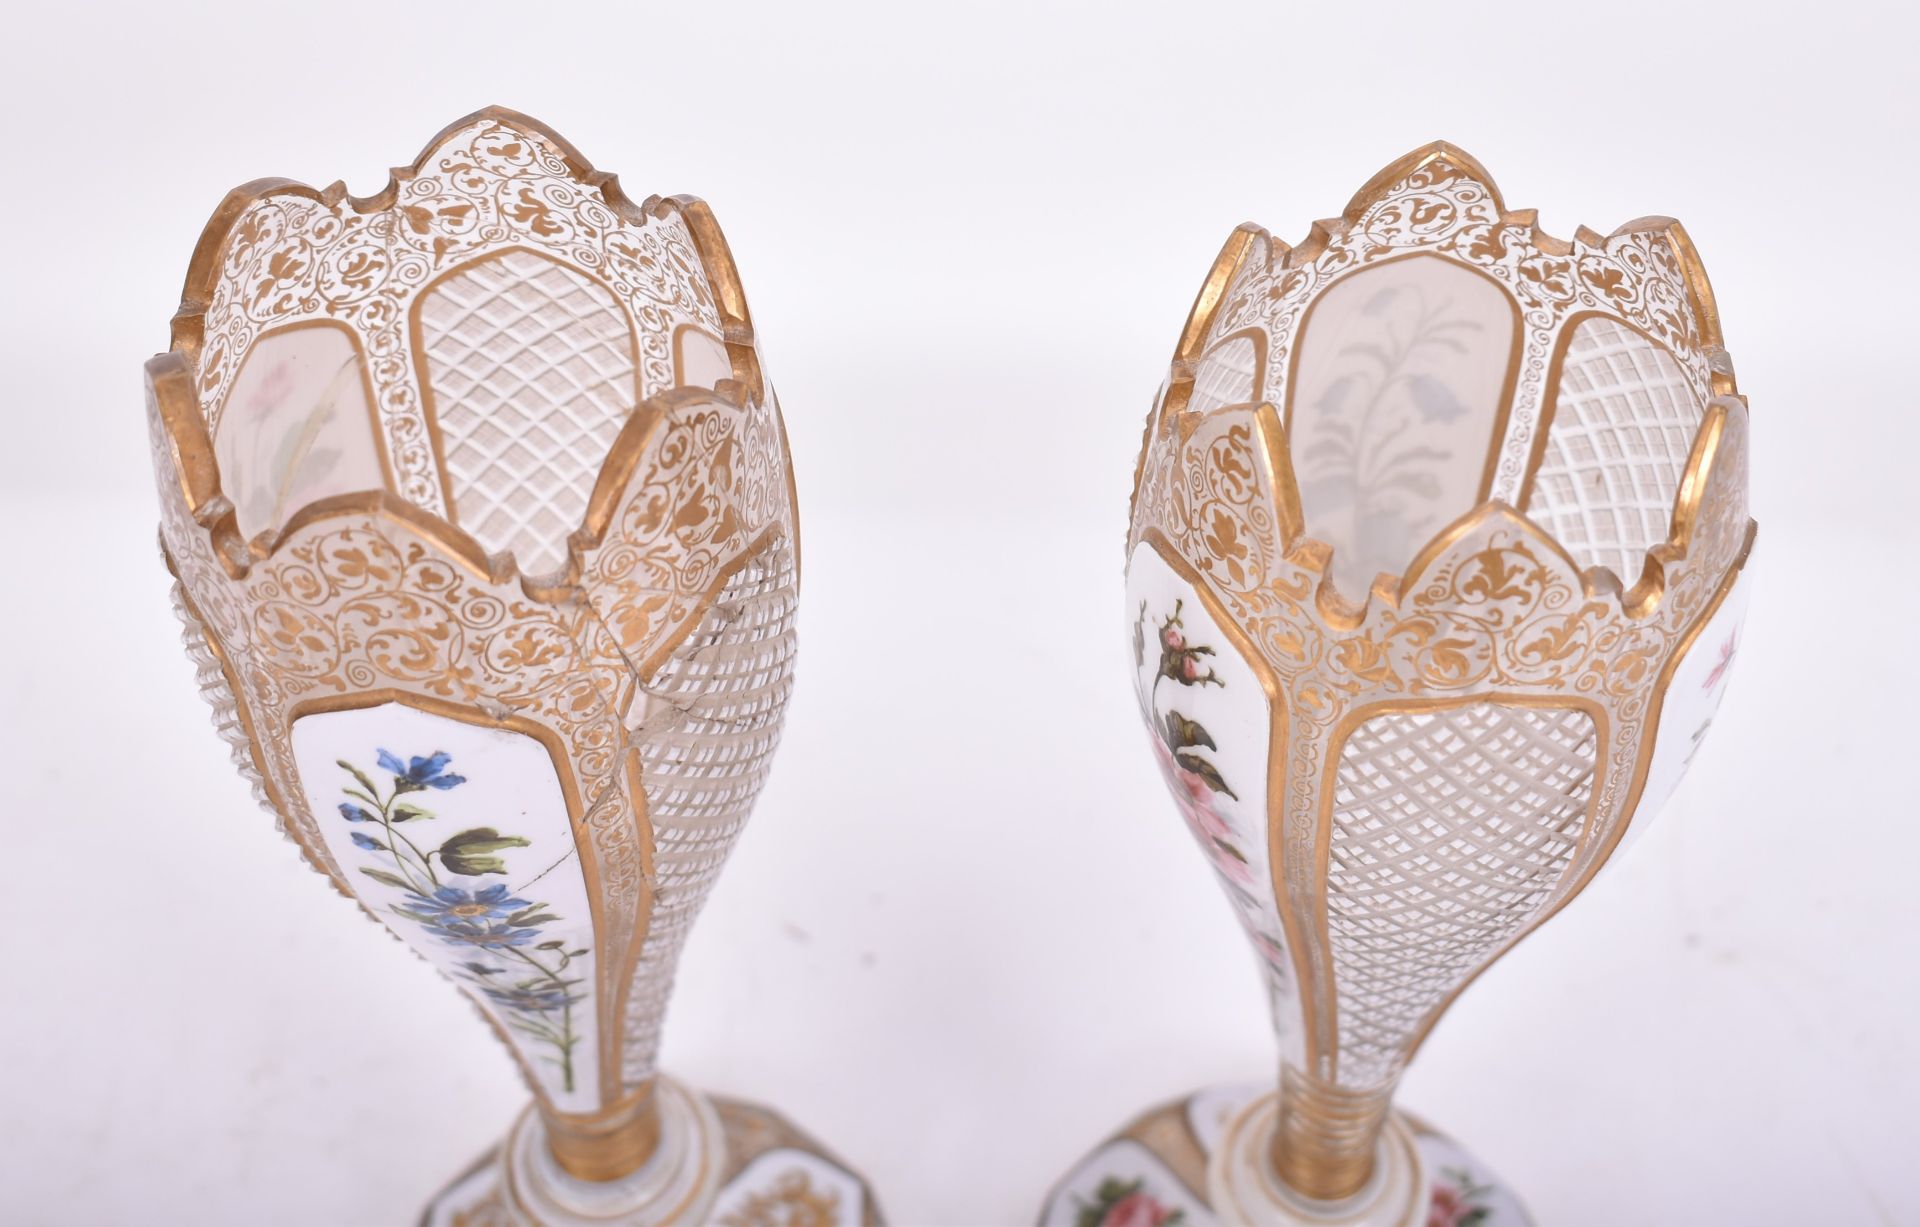 PAIR OF 19TH CENTURY BOHEMIAN CZECH OVERLAY GLASS VASES - Image 2 of 8